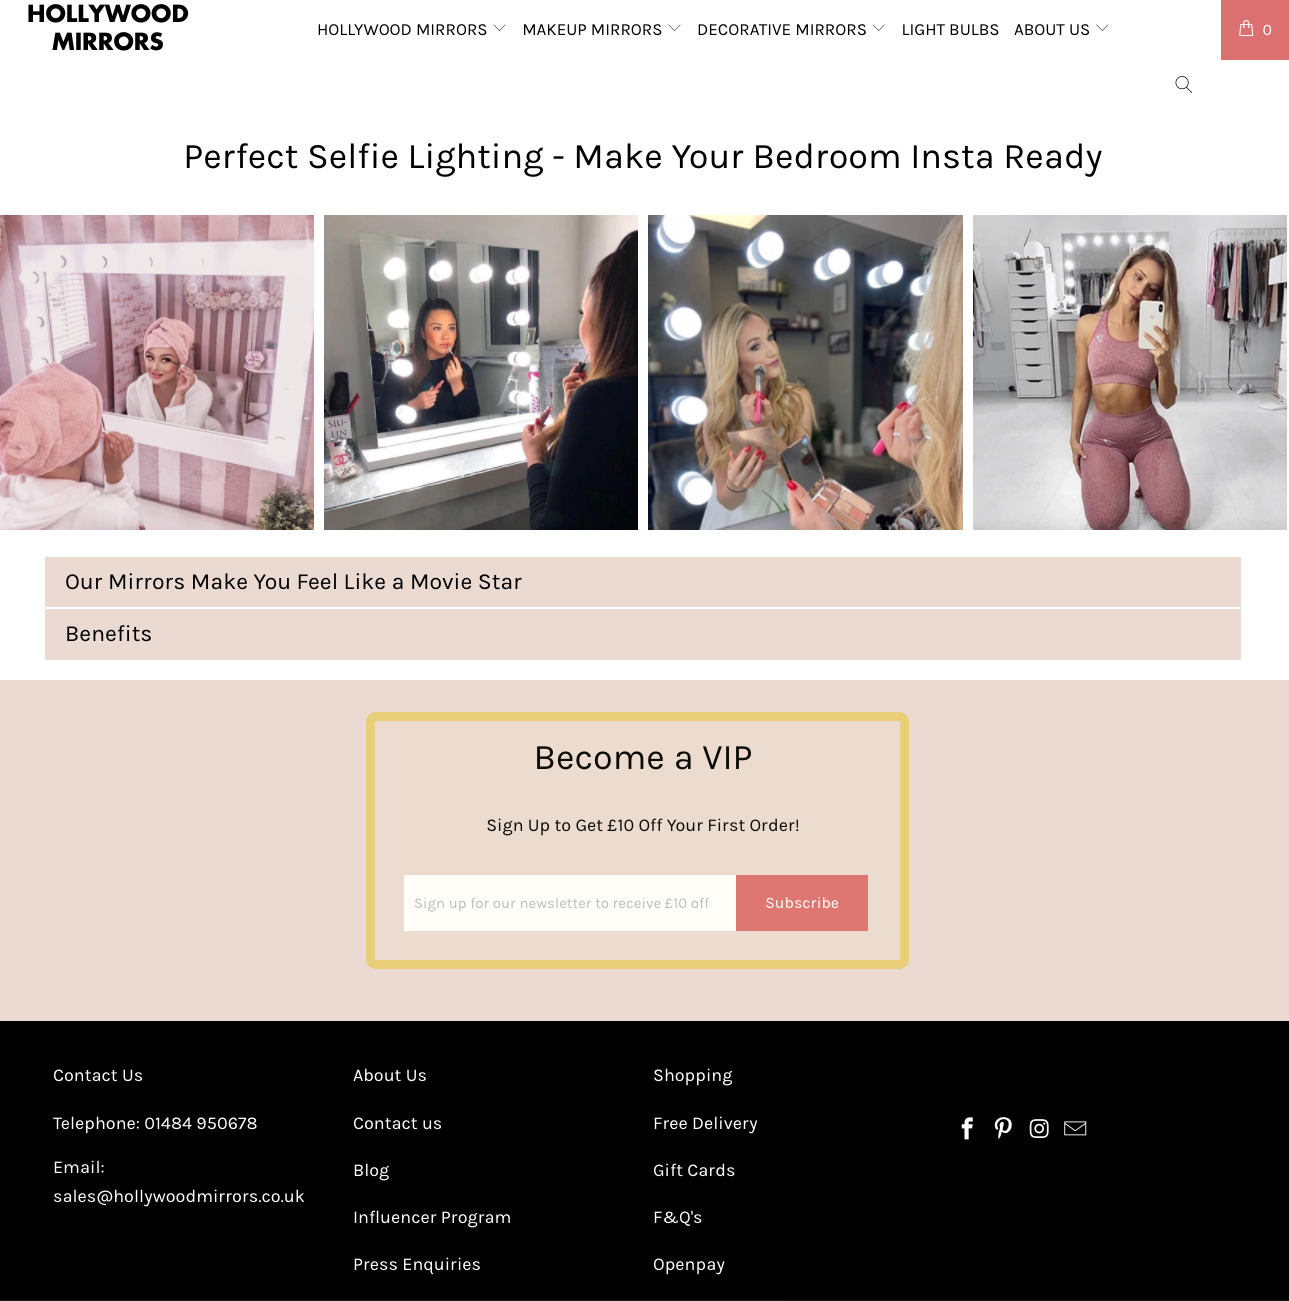 Page showing ladies using mirrors; below, text field to subscribe and become a VIP